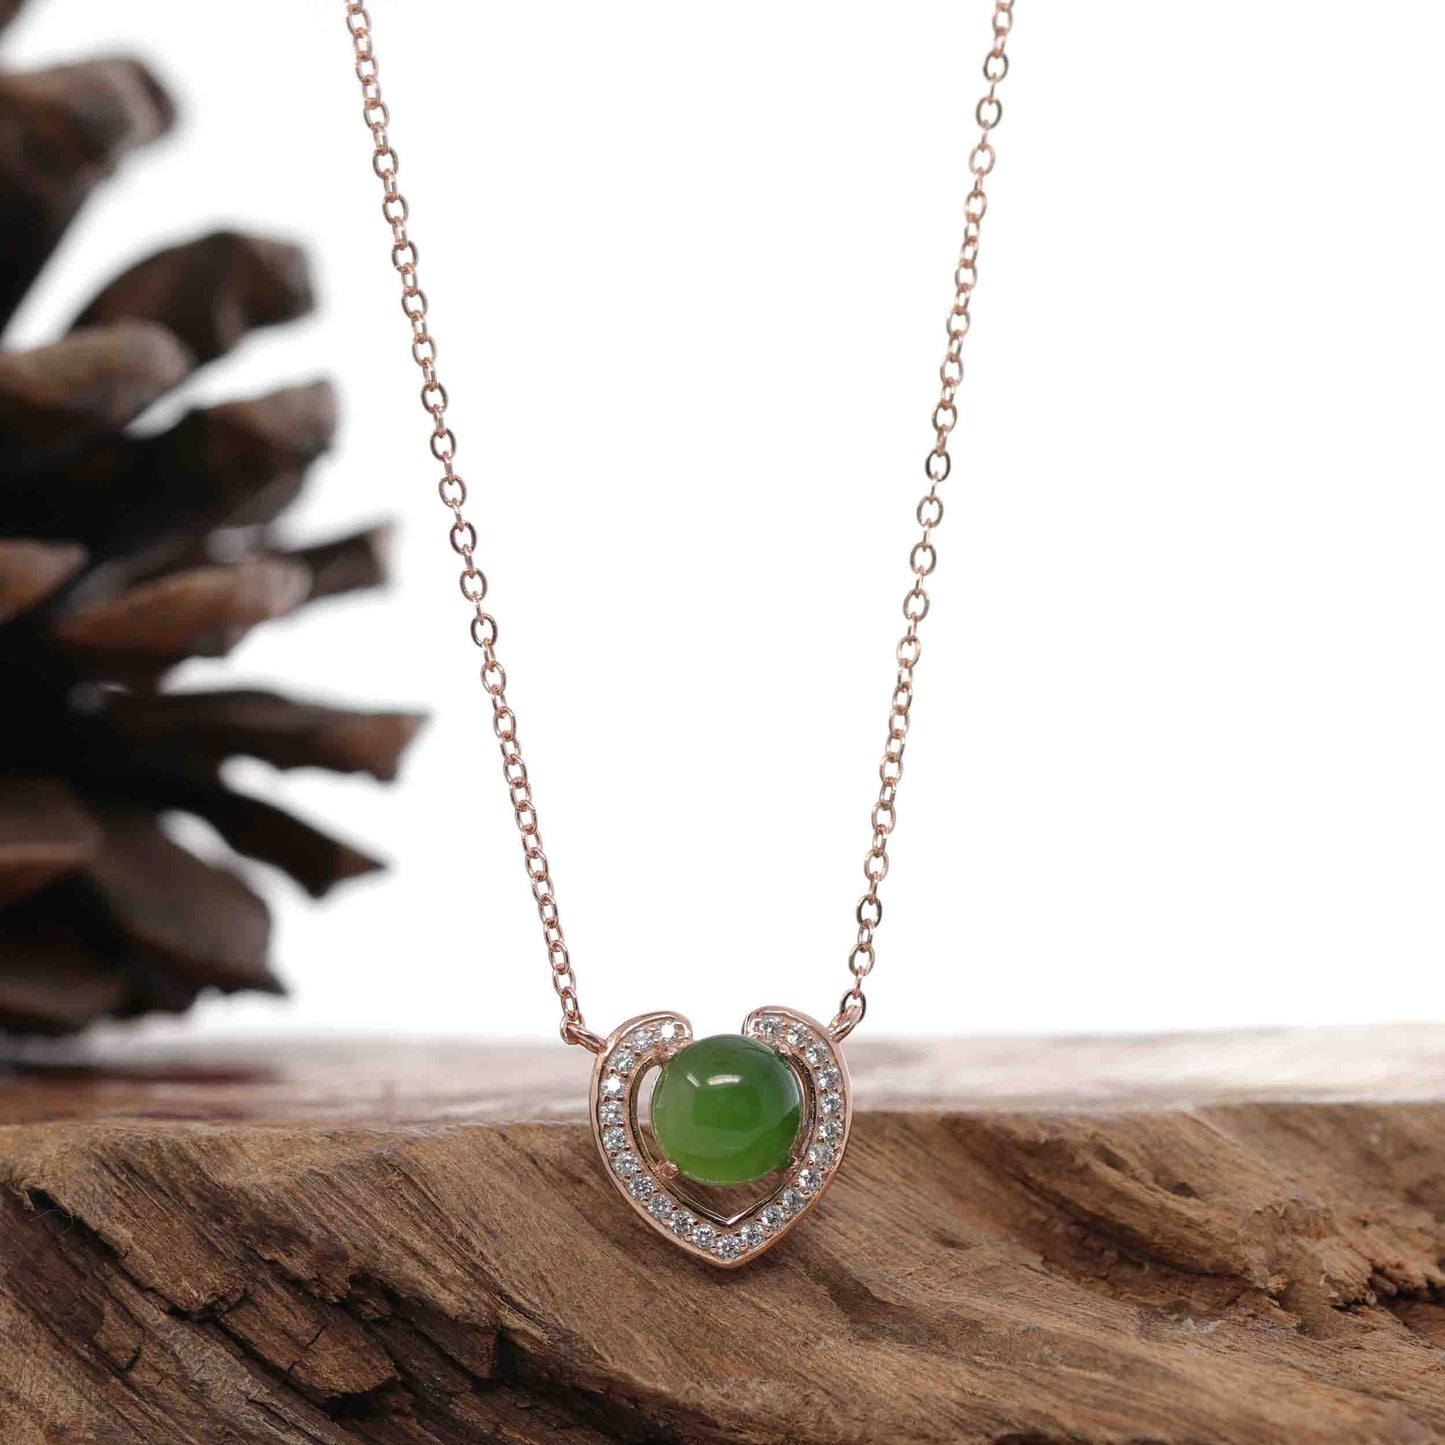 RealJade¨™ Sterling Silver Real Green Nephrite Jade Love Pendant Necklace With CZ